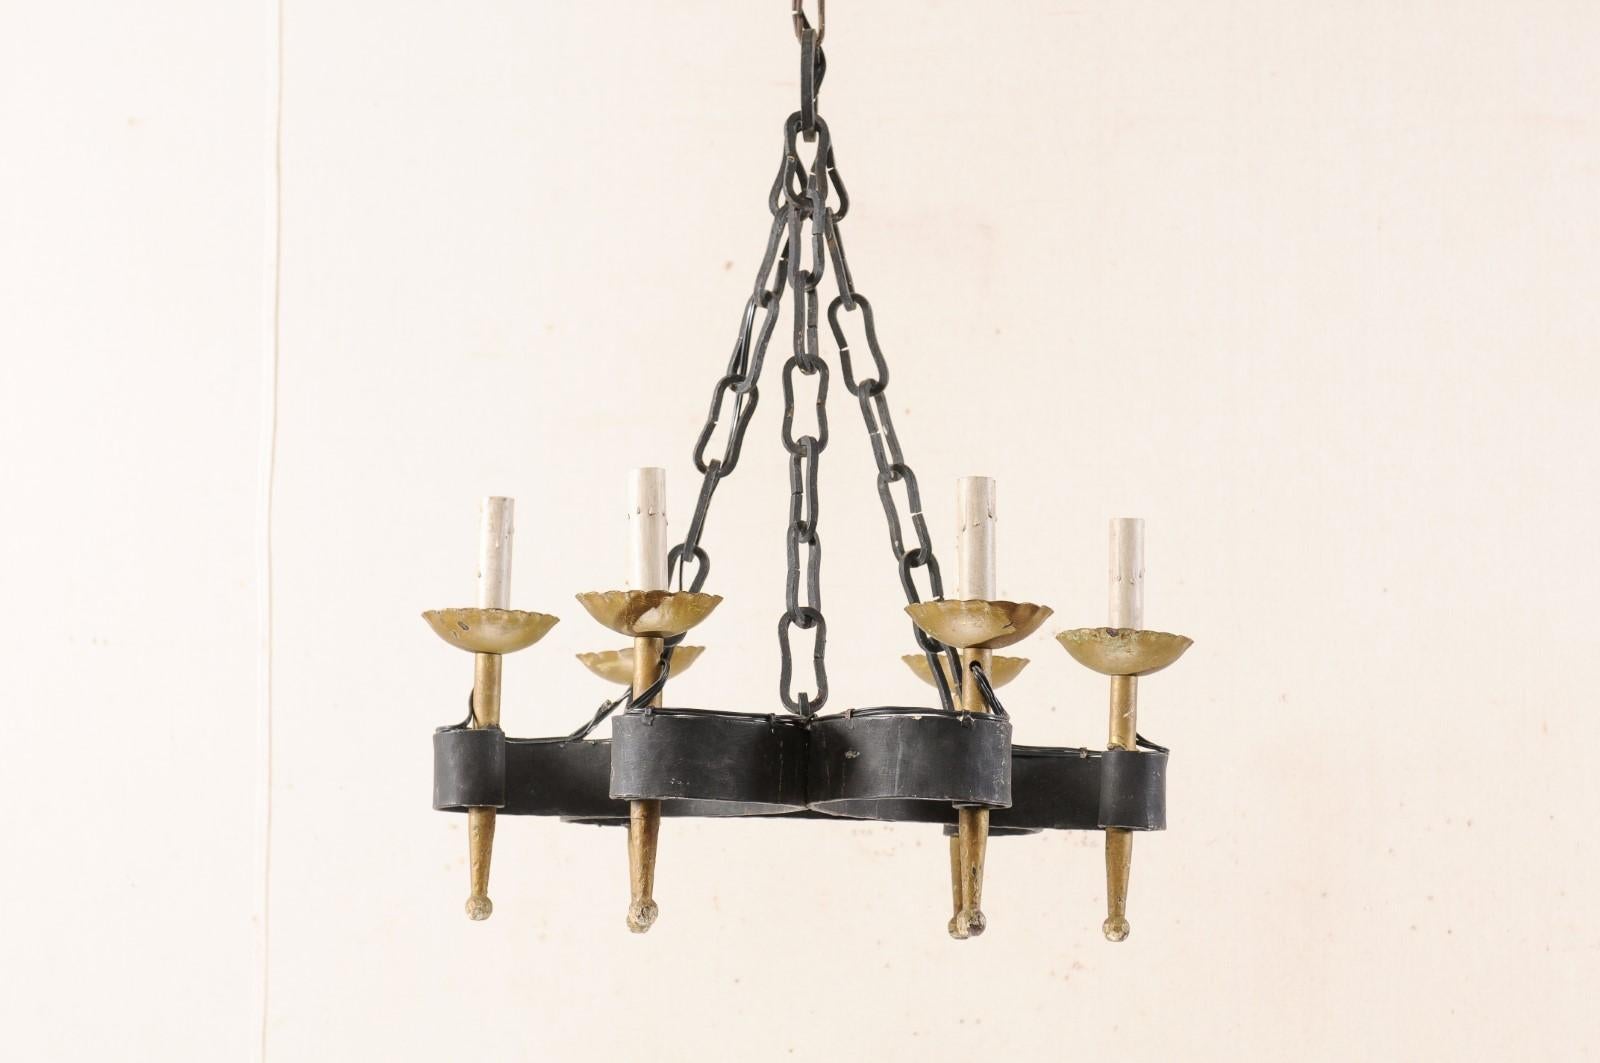 A French six-light iron chandelier from the mid-20th century. This vintage French hand forged iron chandelier features a central gallery comprised of three wide-banded and connected C-shaped scrolls. The six torch-style golden bronze toned arms are